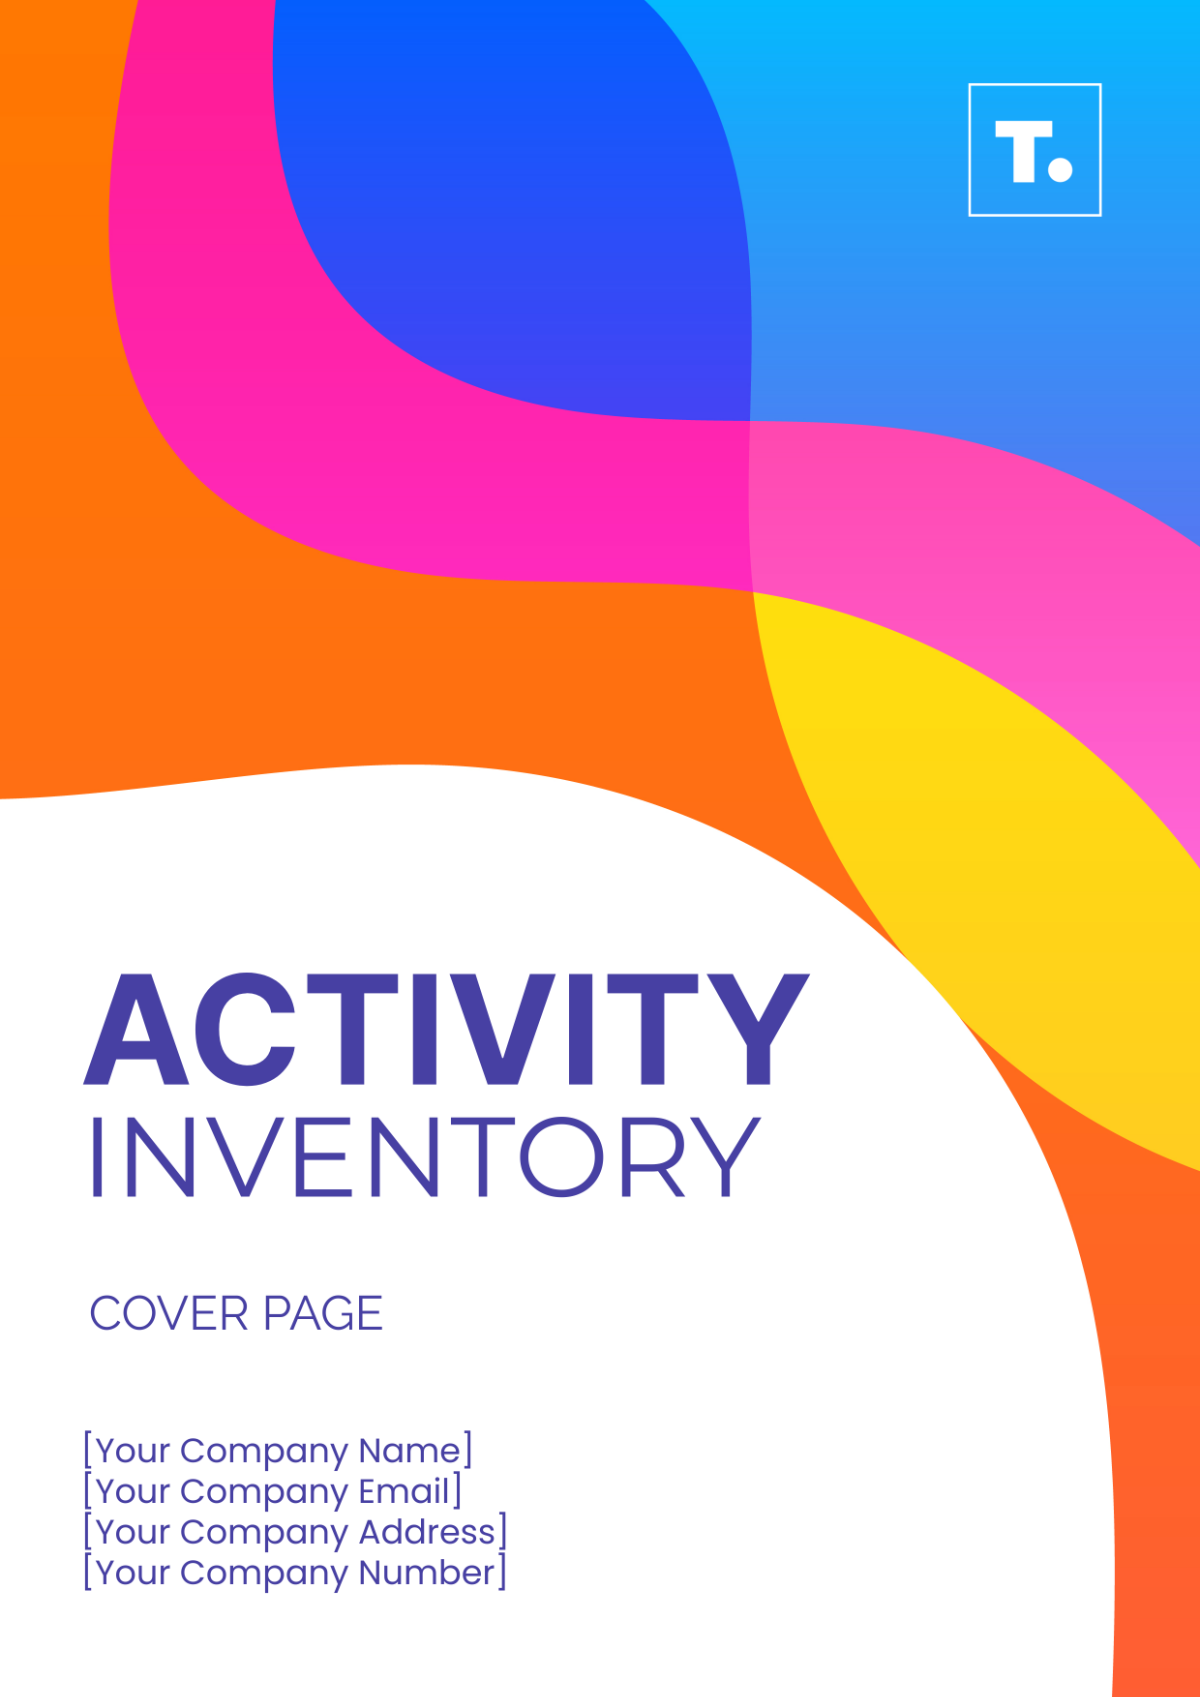 Activity Inventory Cover Page